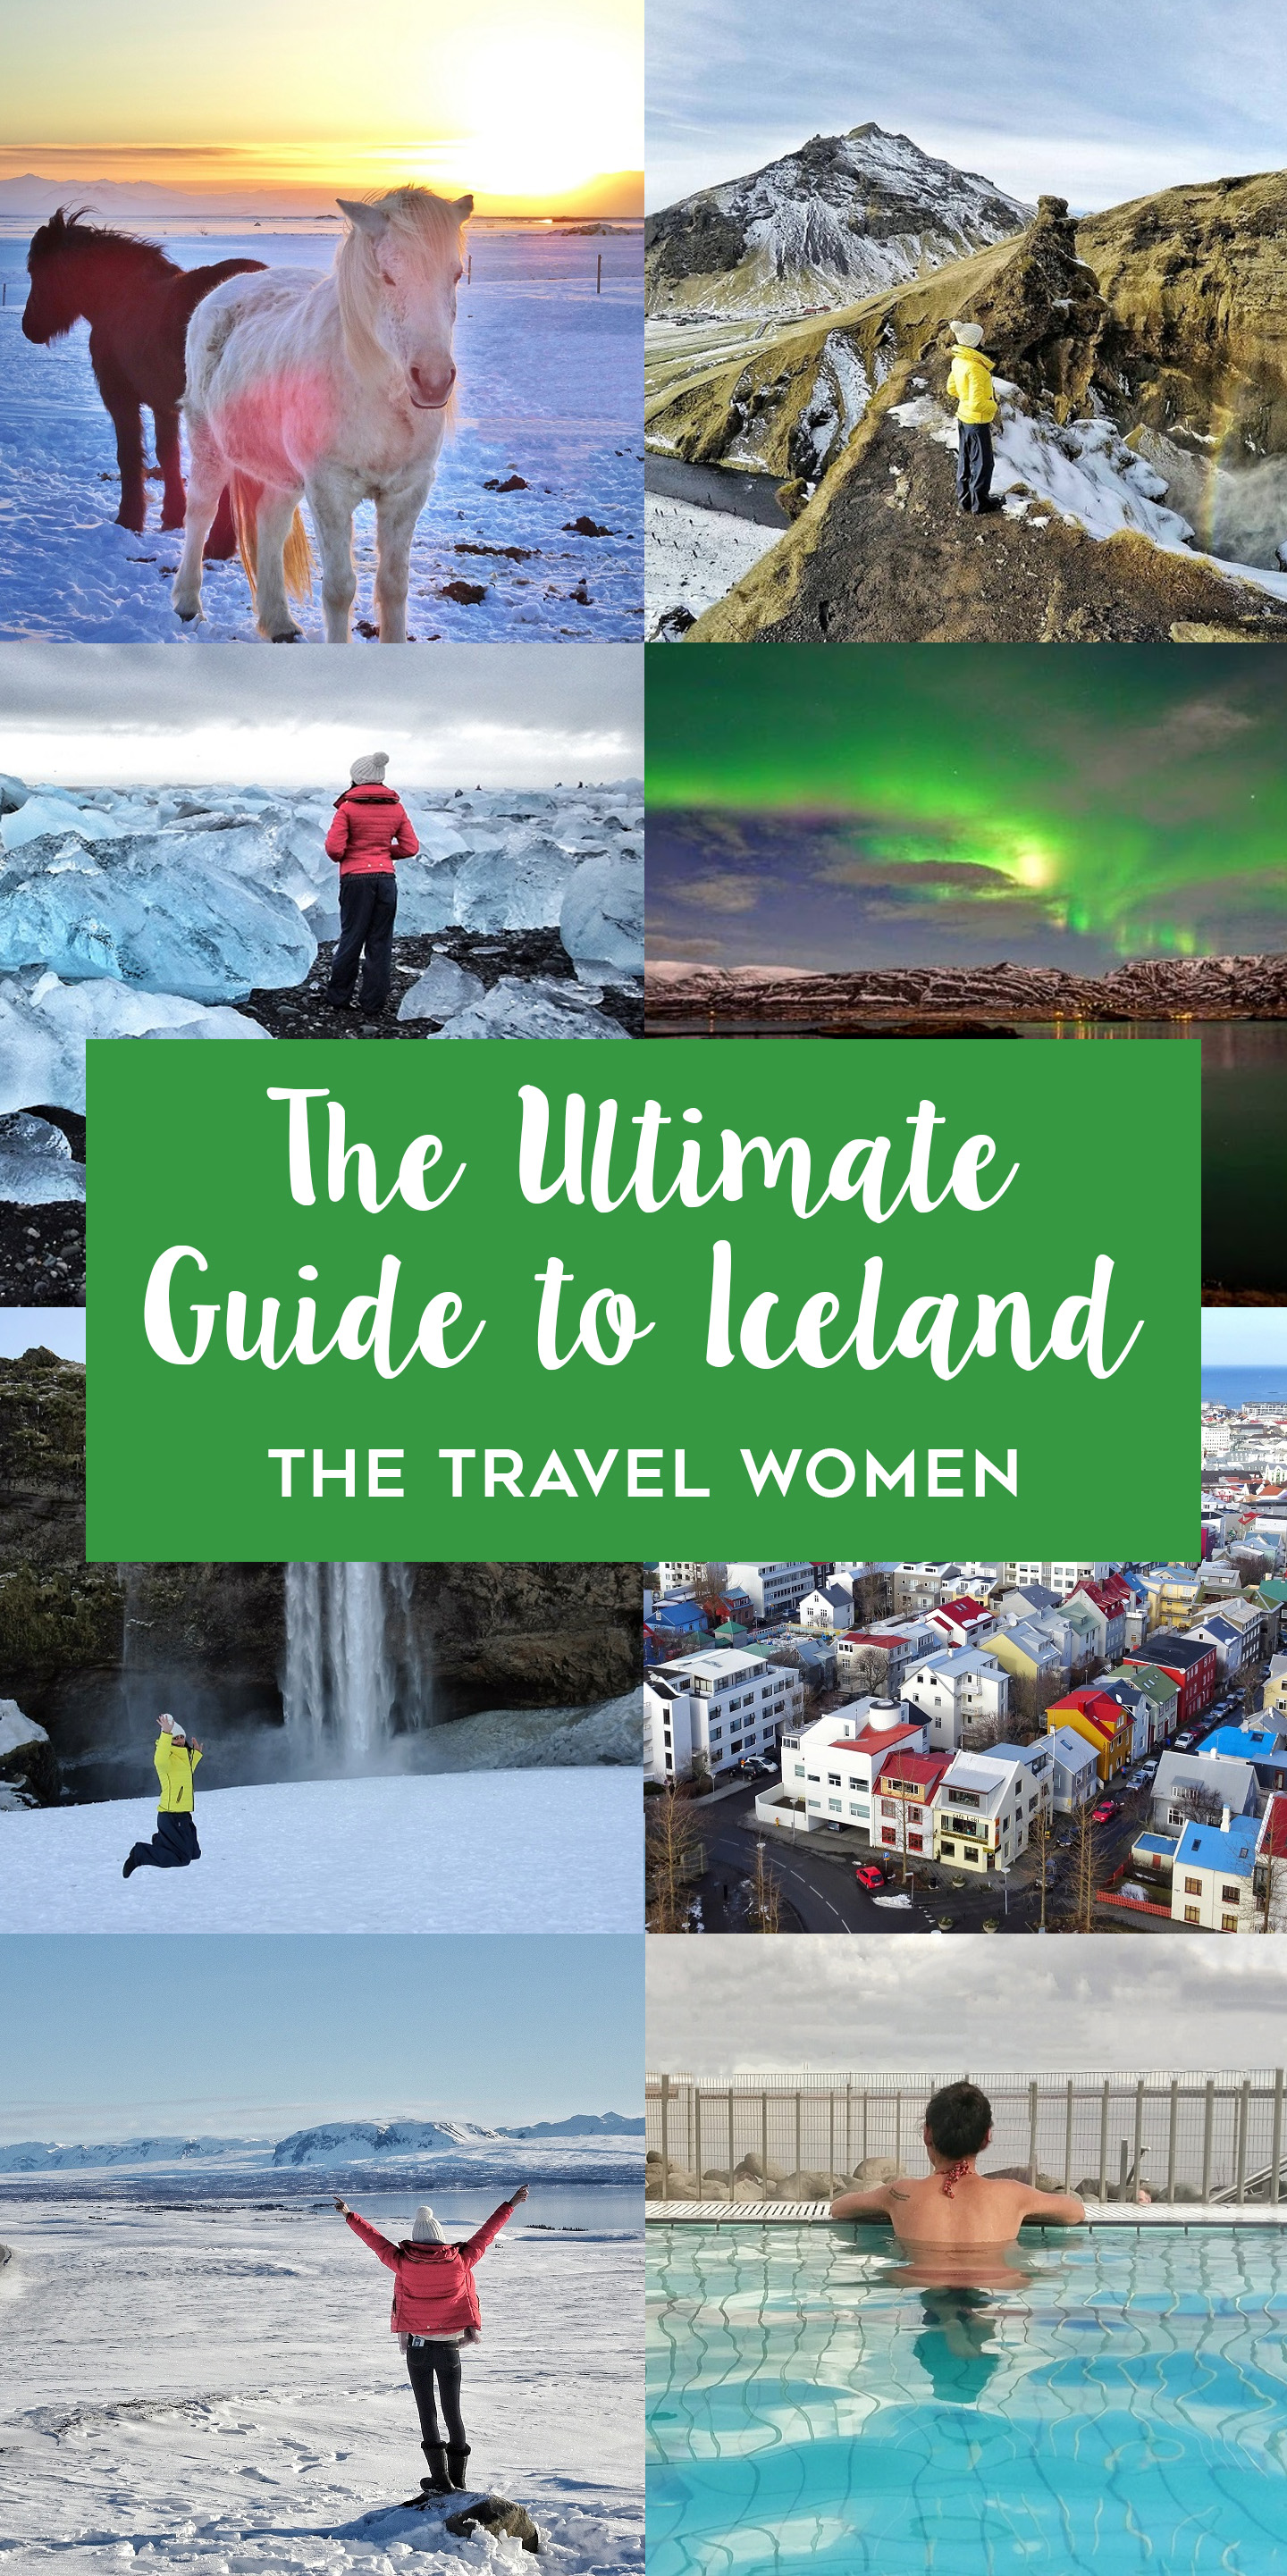 The Ultimate Guide to Iceland